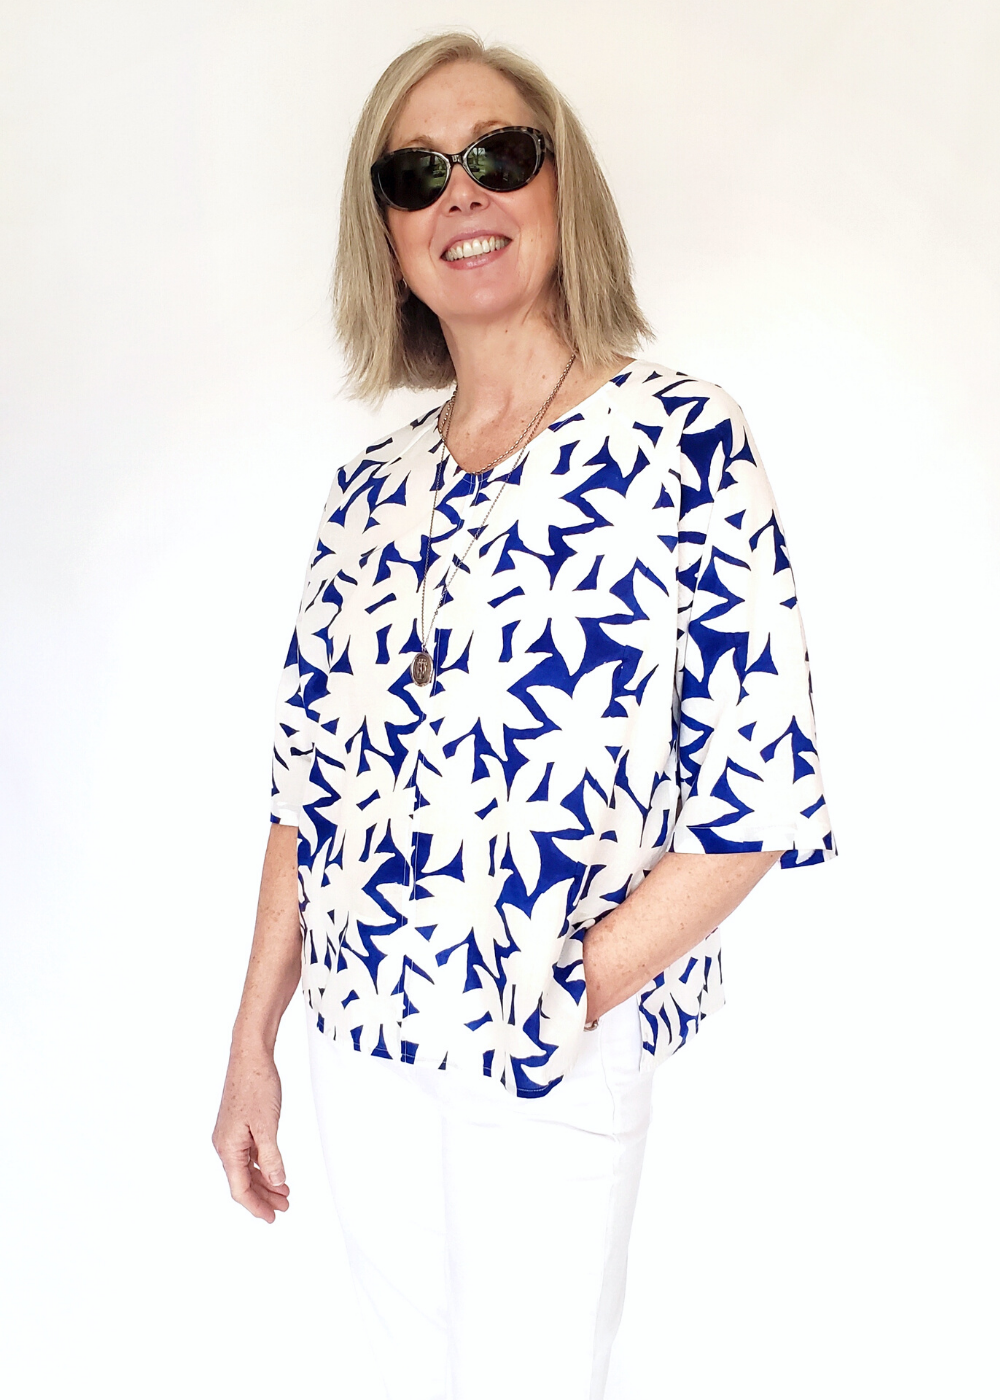 Sale price Raglan Top in Blue and White Mysore Shadow print